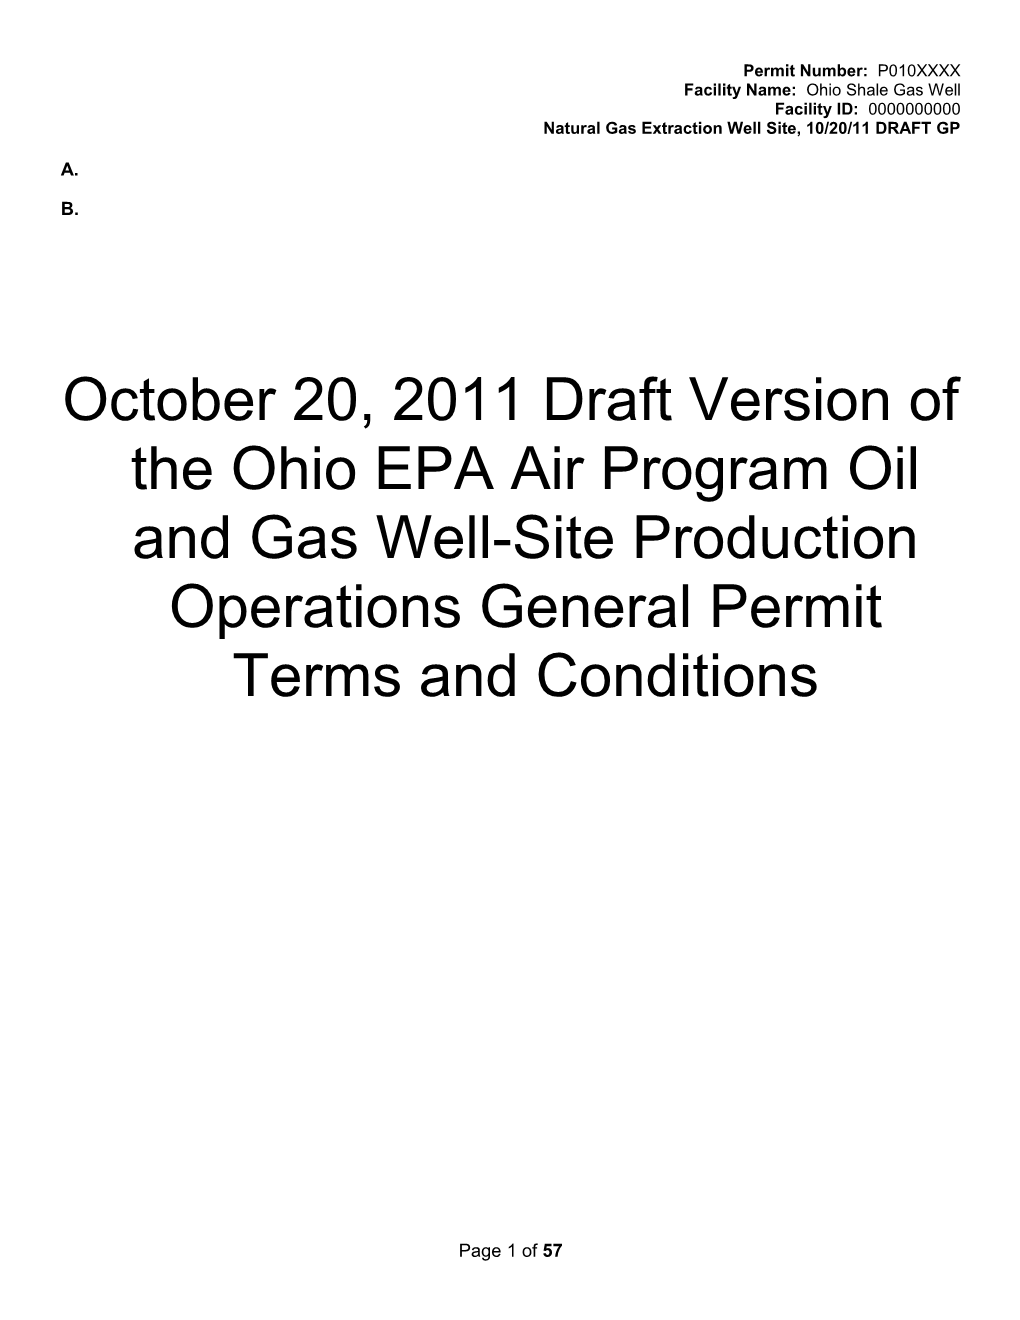 Natural Gas Extraction Well Site, 10/20/11 DRAFT GP